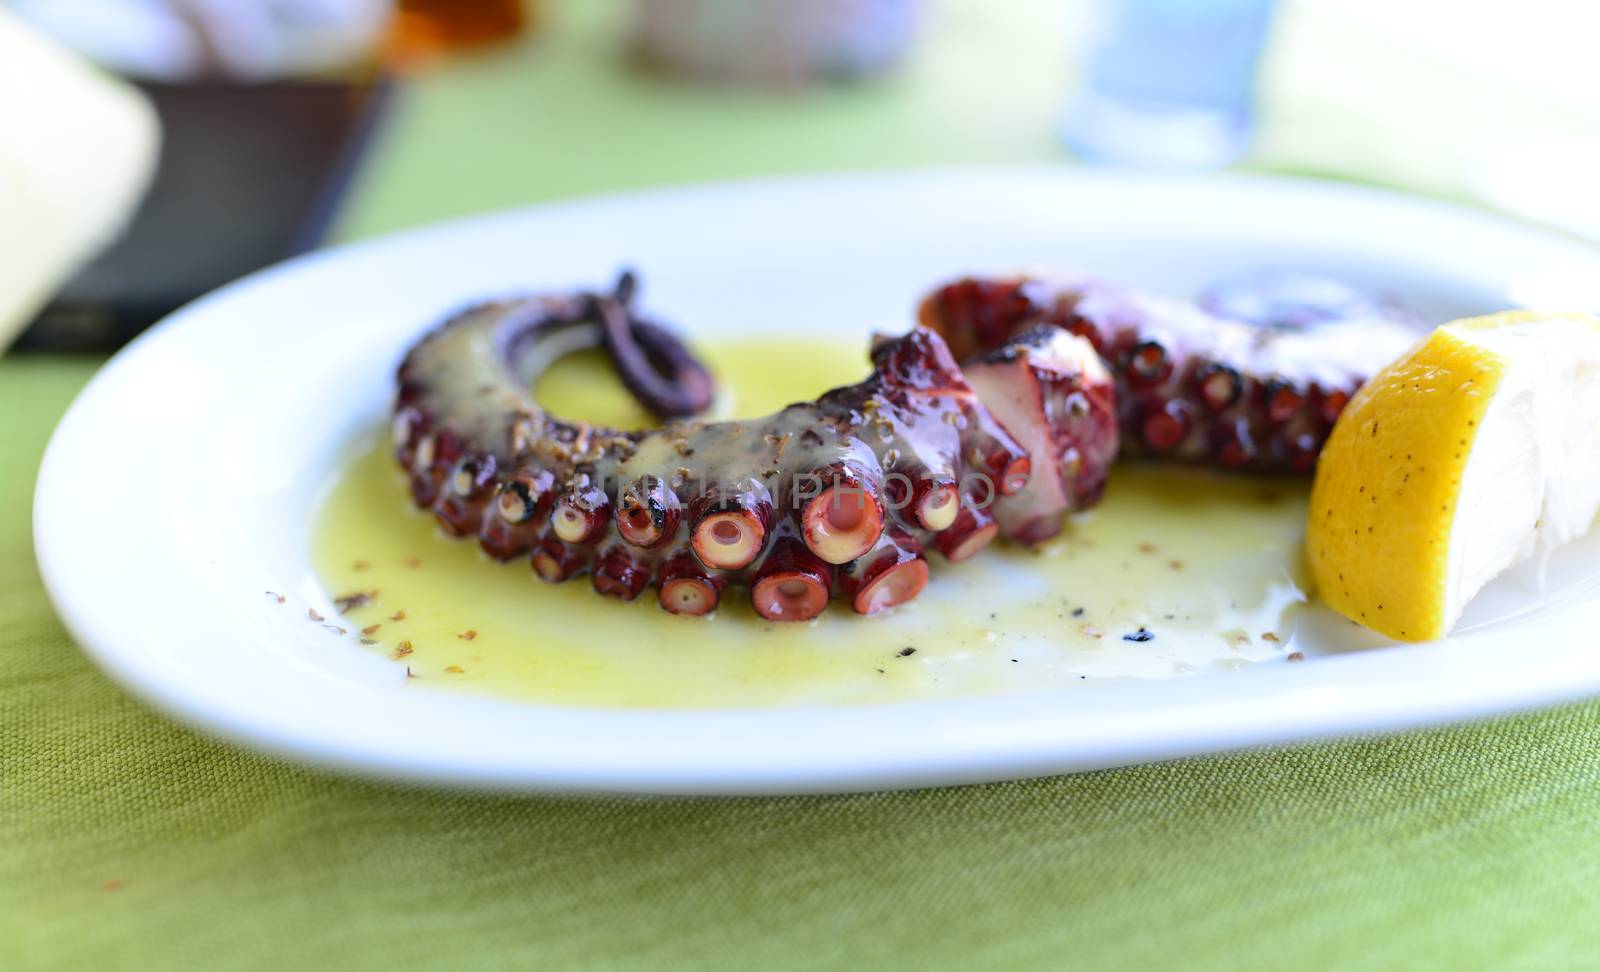 octopus food plate by tony4urban